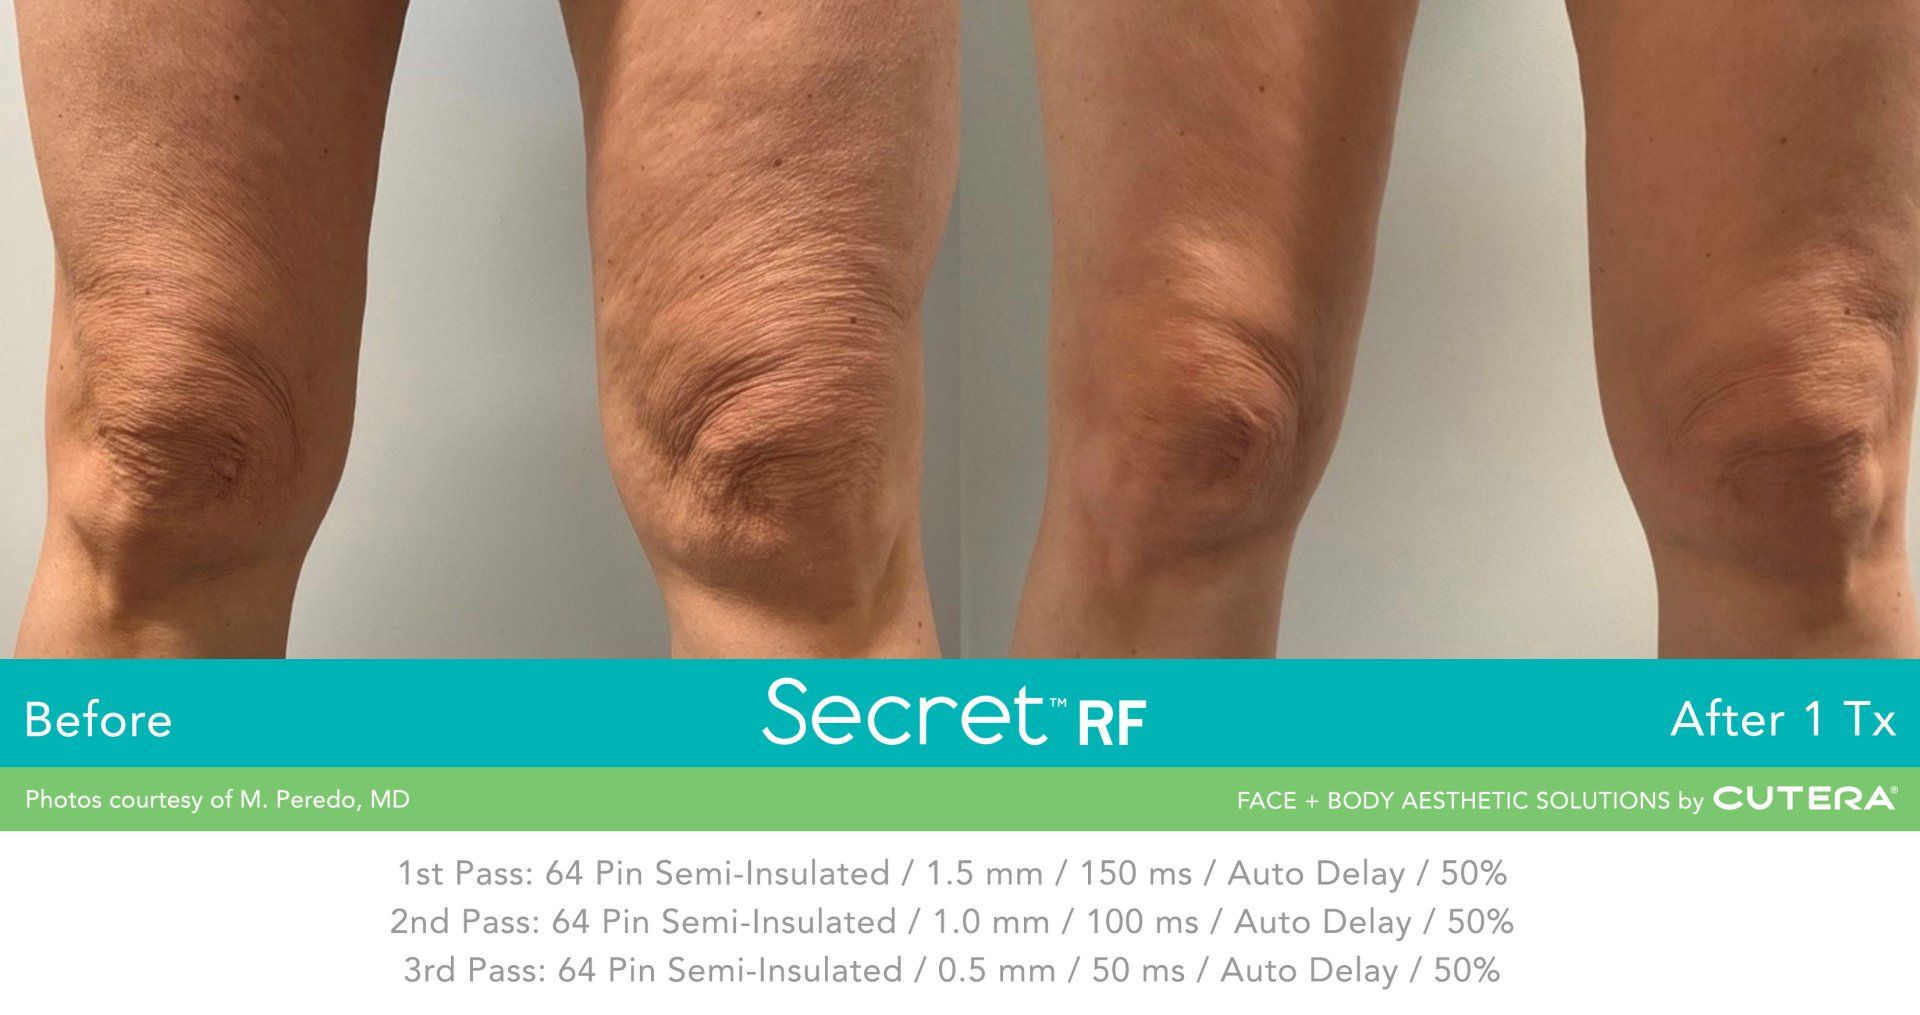 A before and after photo of a person 's knee.